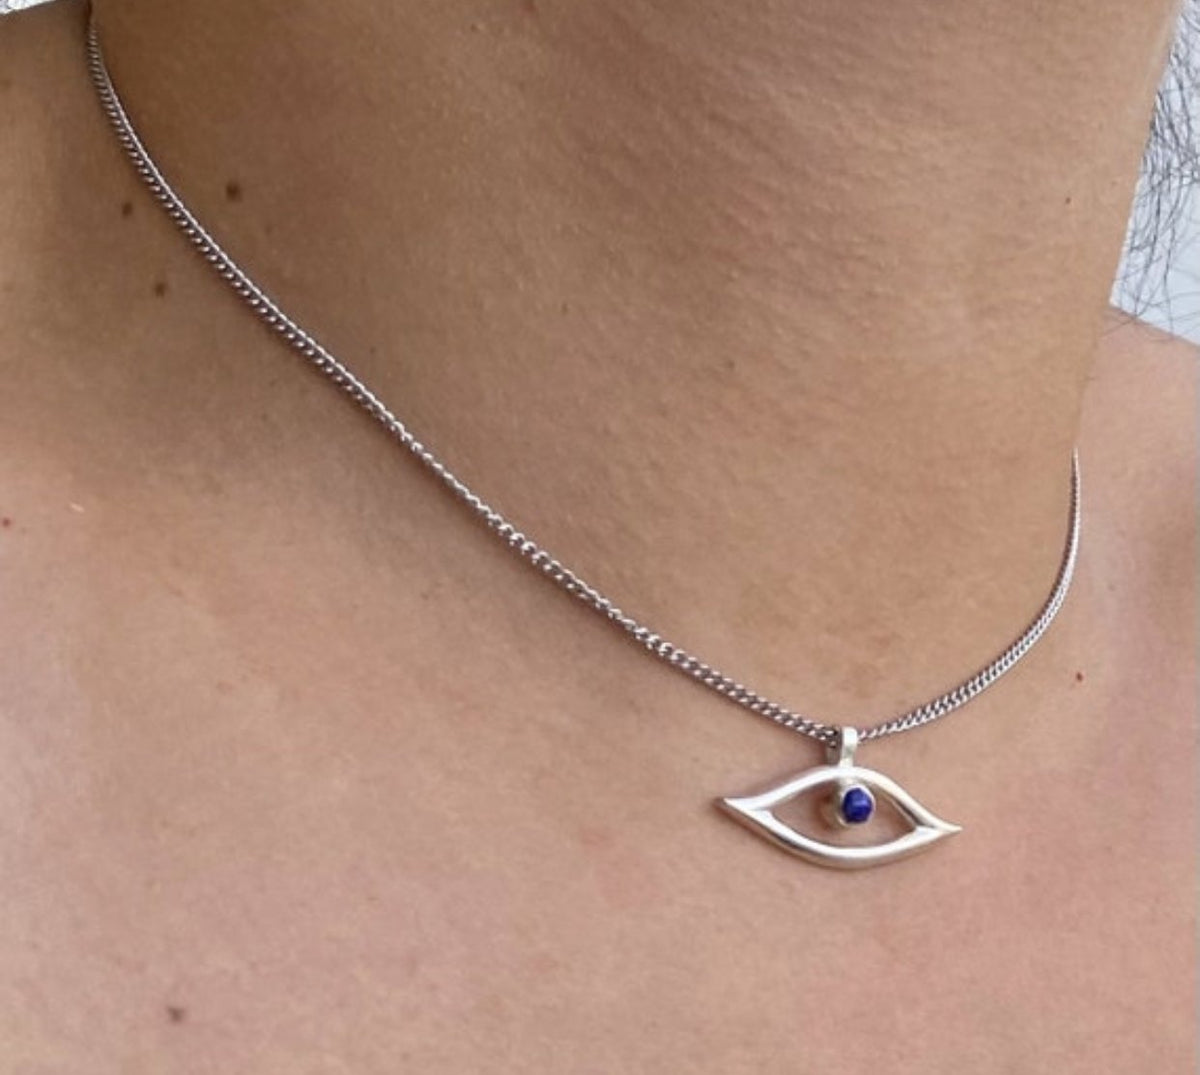 Evil eye necklace blue lapis stainless steel chain